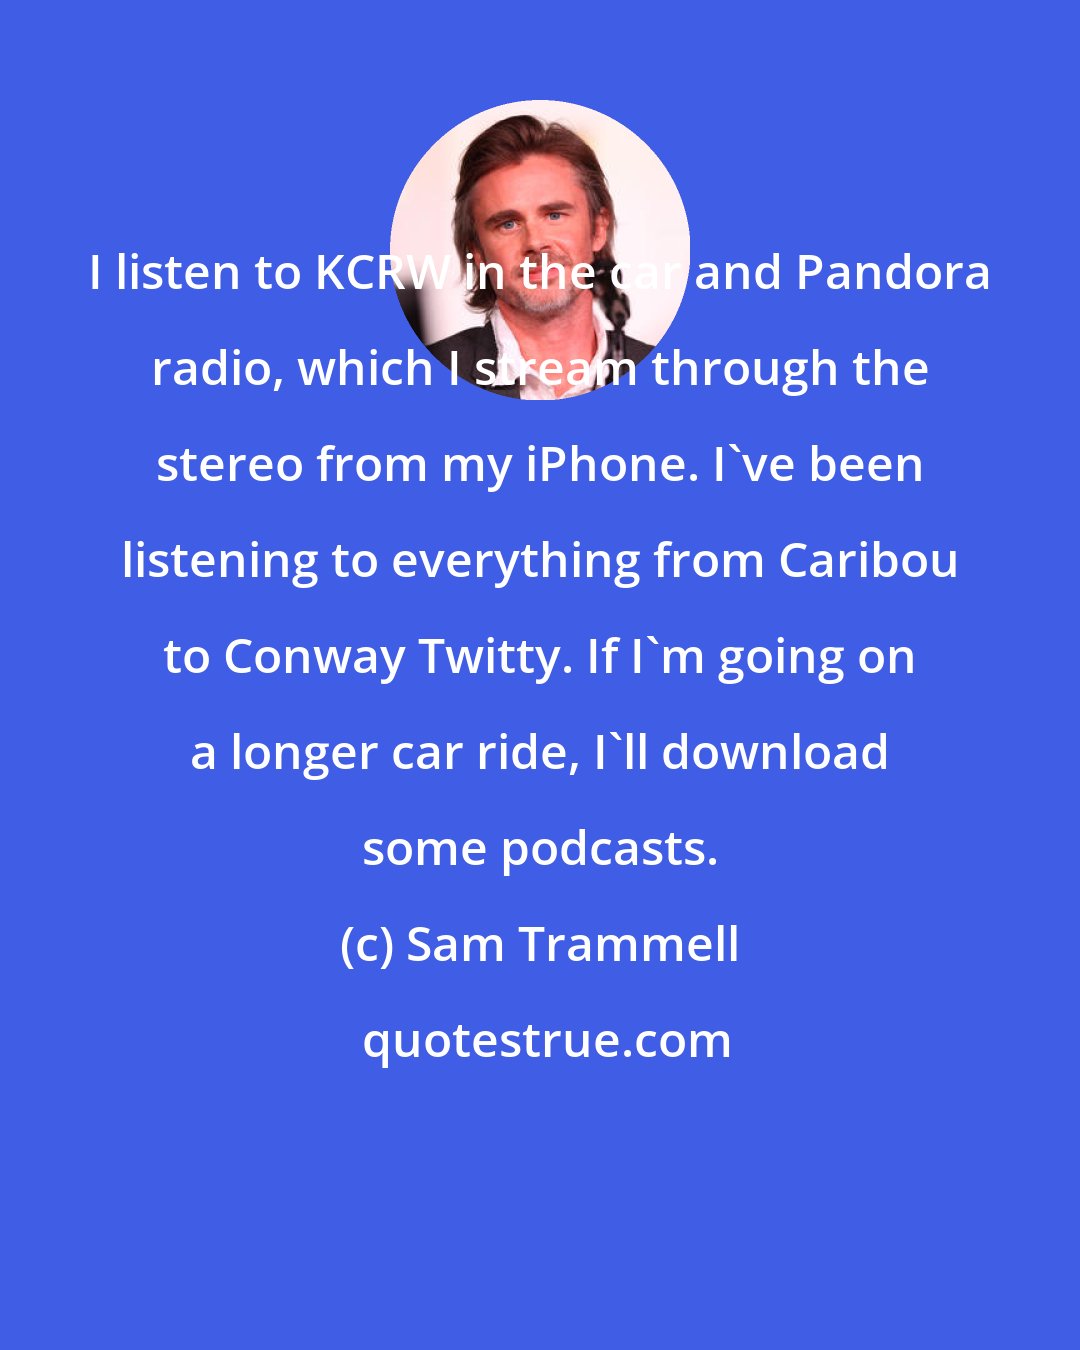 Sam Trammell: I listen to KCRW in the car and Pandora radio, which I stream through the stereo from my iPhone. I've been listening to everything from Caribou to Conway Twitty. If I'm going on a longer car ride, I'll download some podcasts.